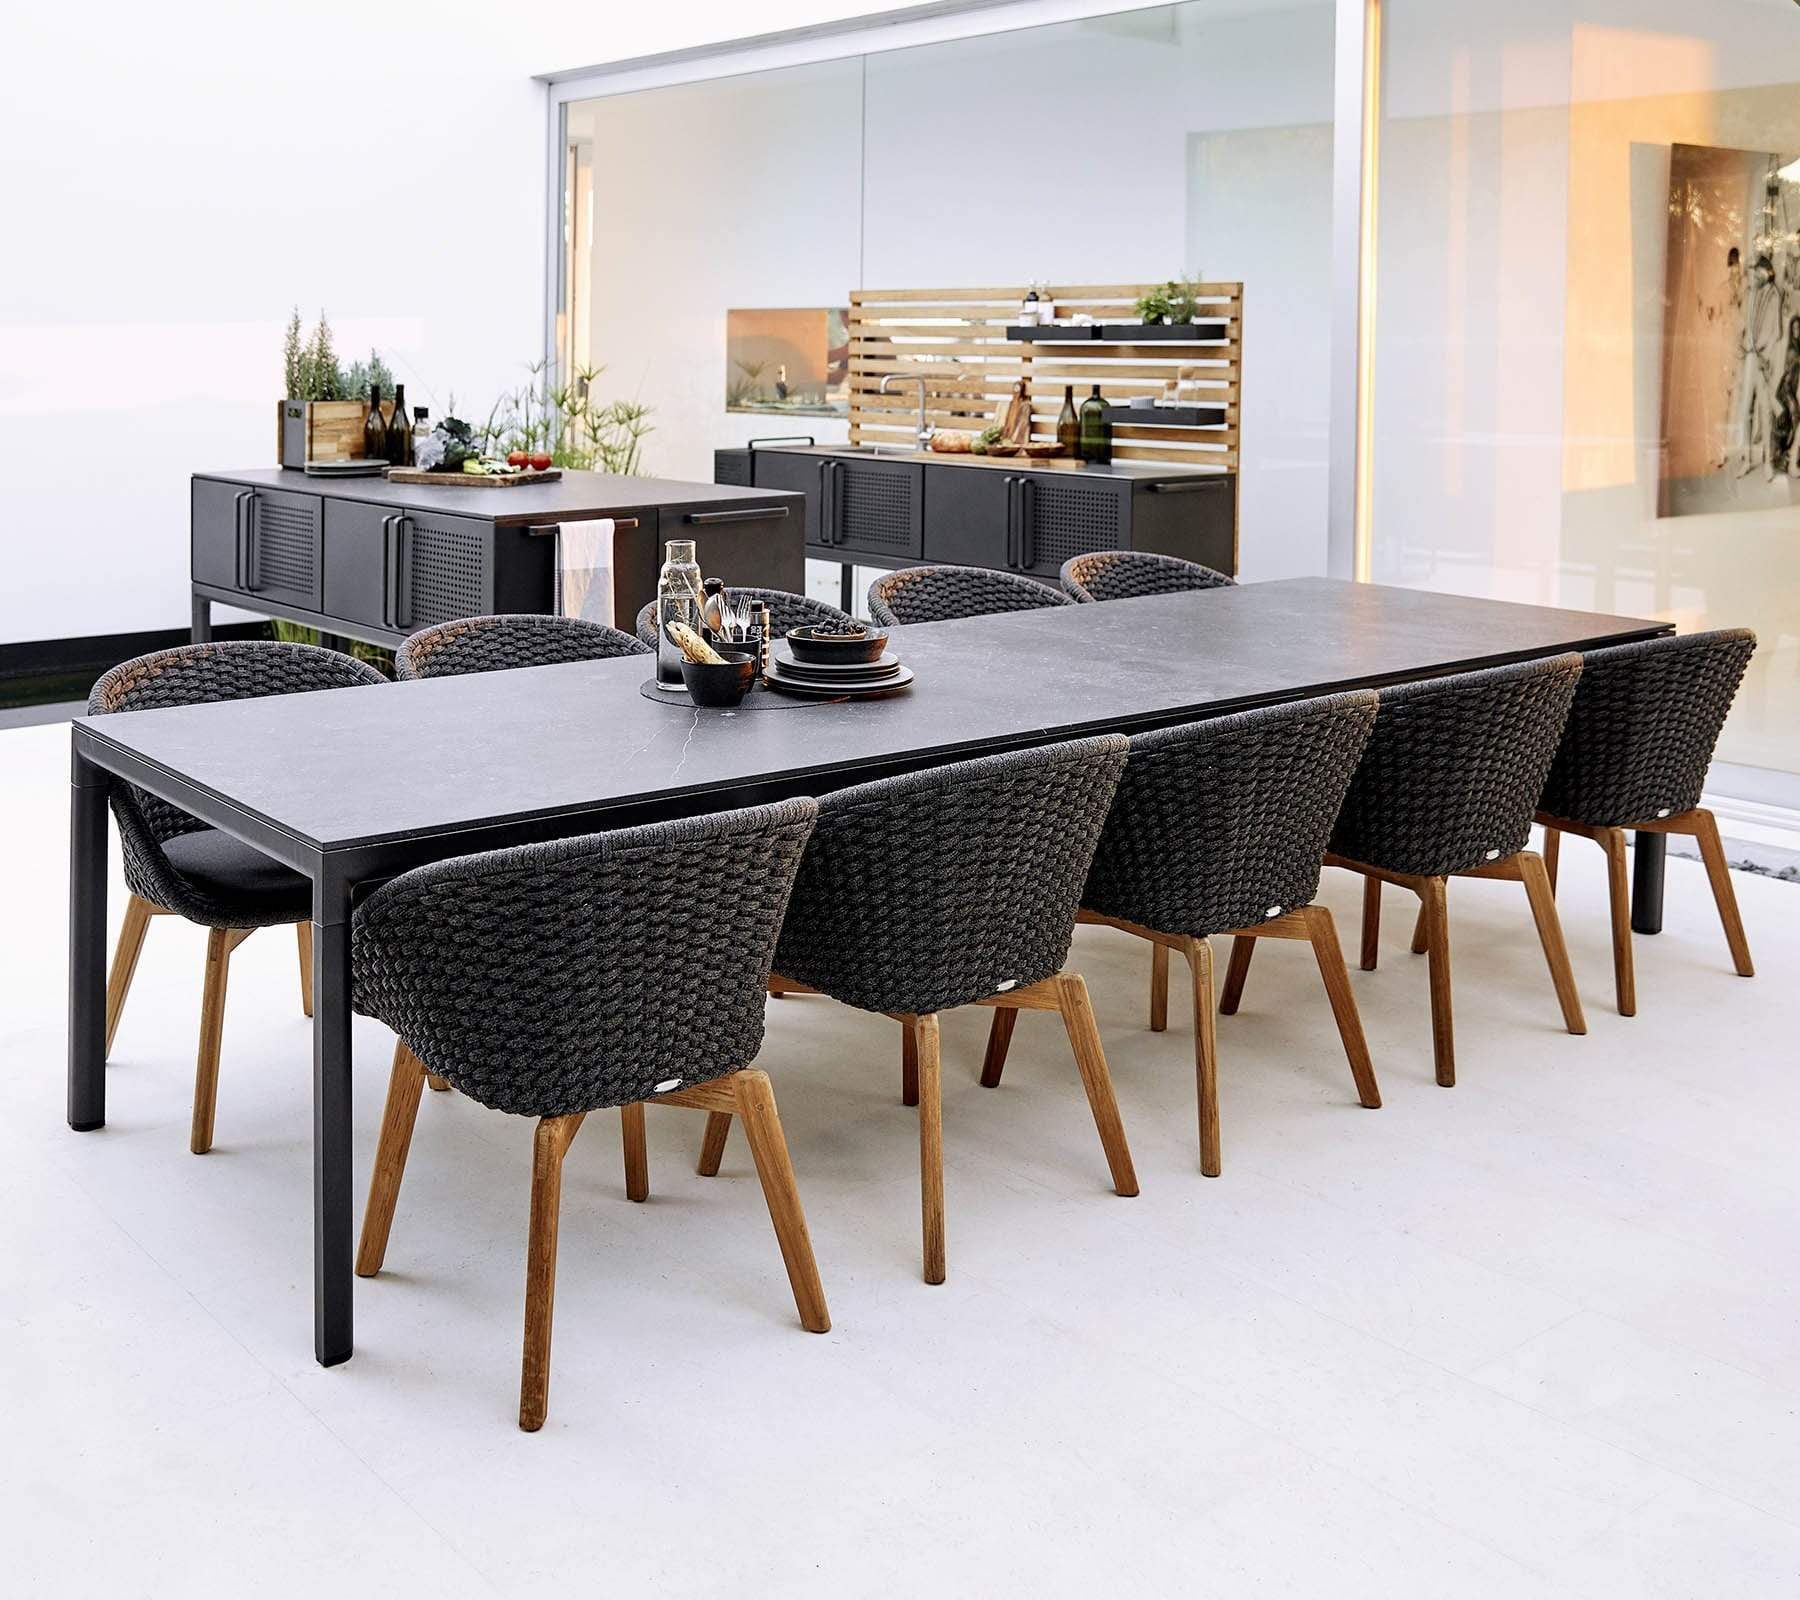 Boxhill's Drop Outdoor Dining Table with 78.8" Table Extension Lava Grey Base Black Tabletop lifestyle image with 10 dining chairs and Drop Outdoor Kitchen Module 